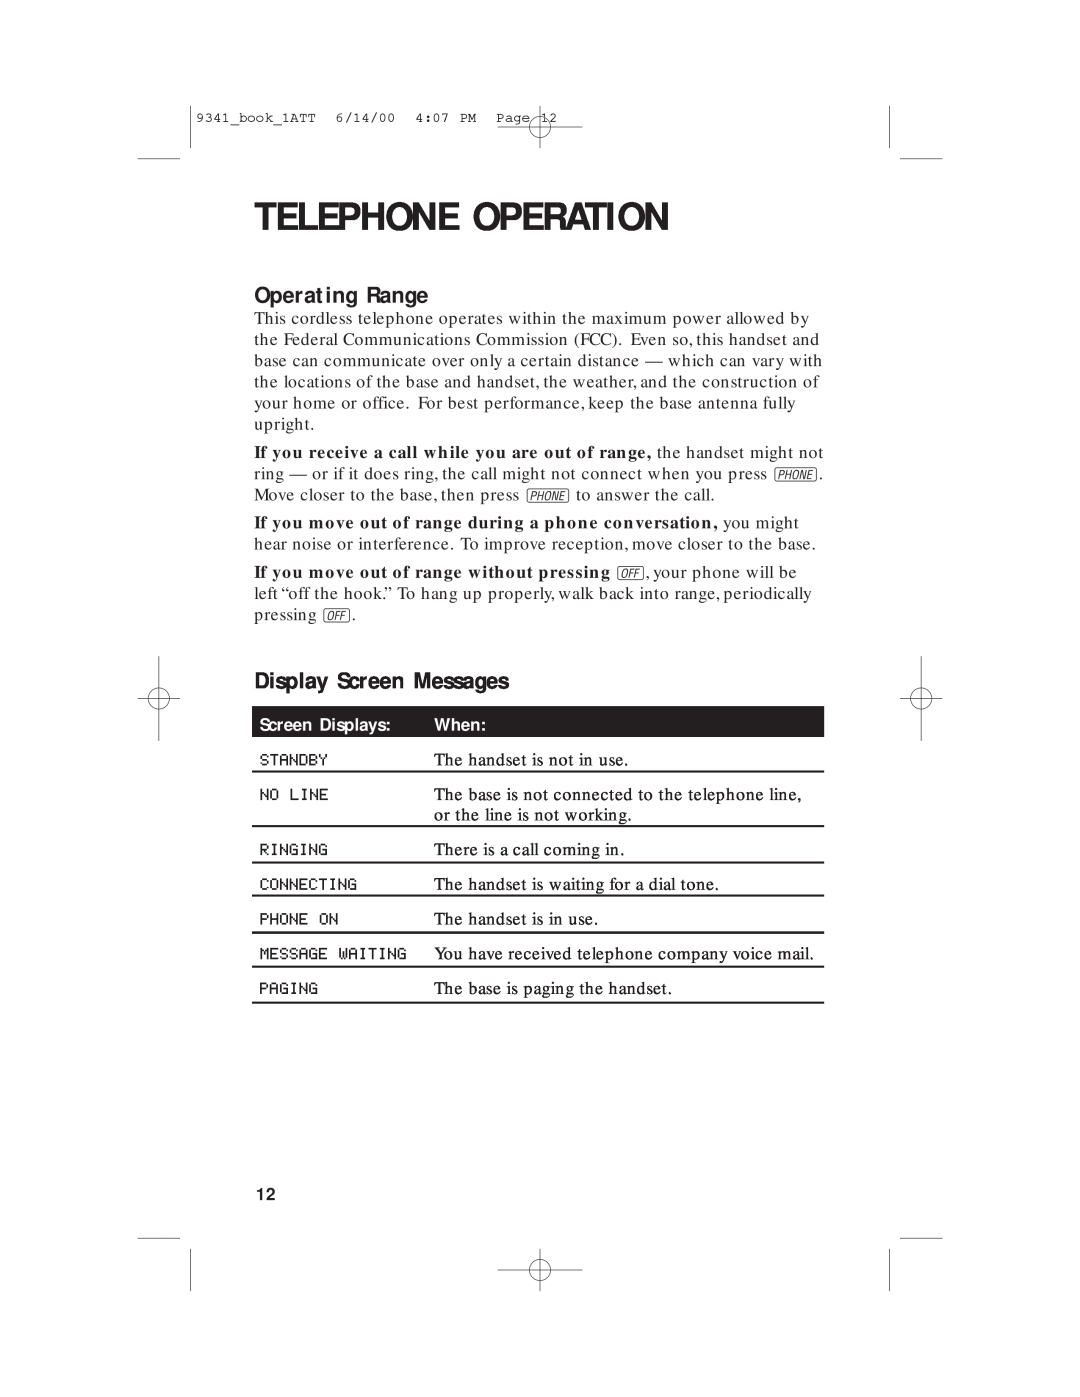 AT&T 9341 user manual Operating Range, Display Screen Messages, Screen Displays, When, Telephone Operation 